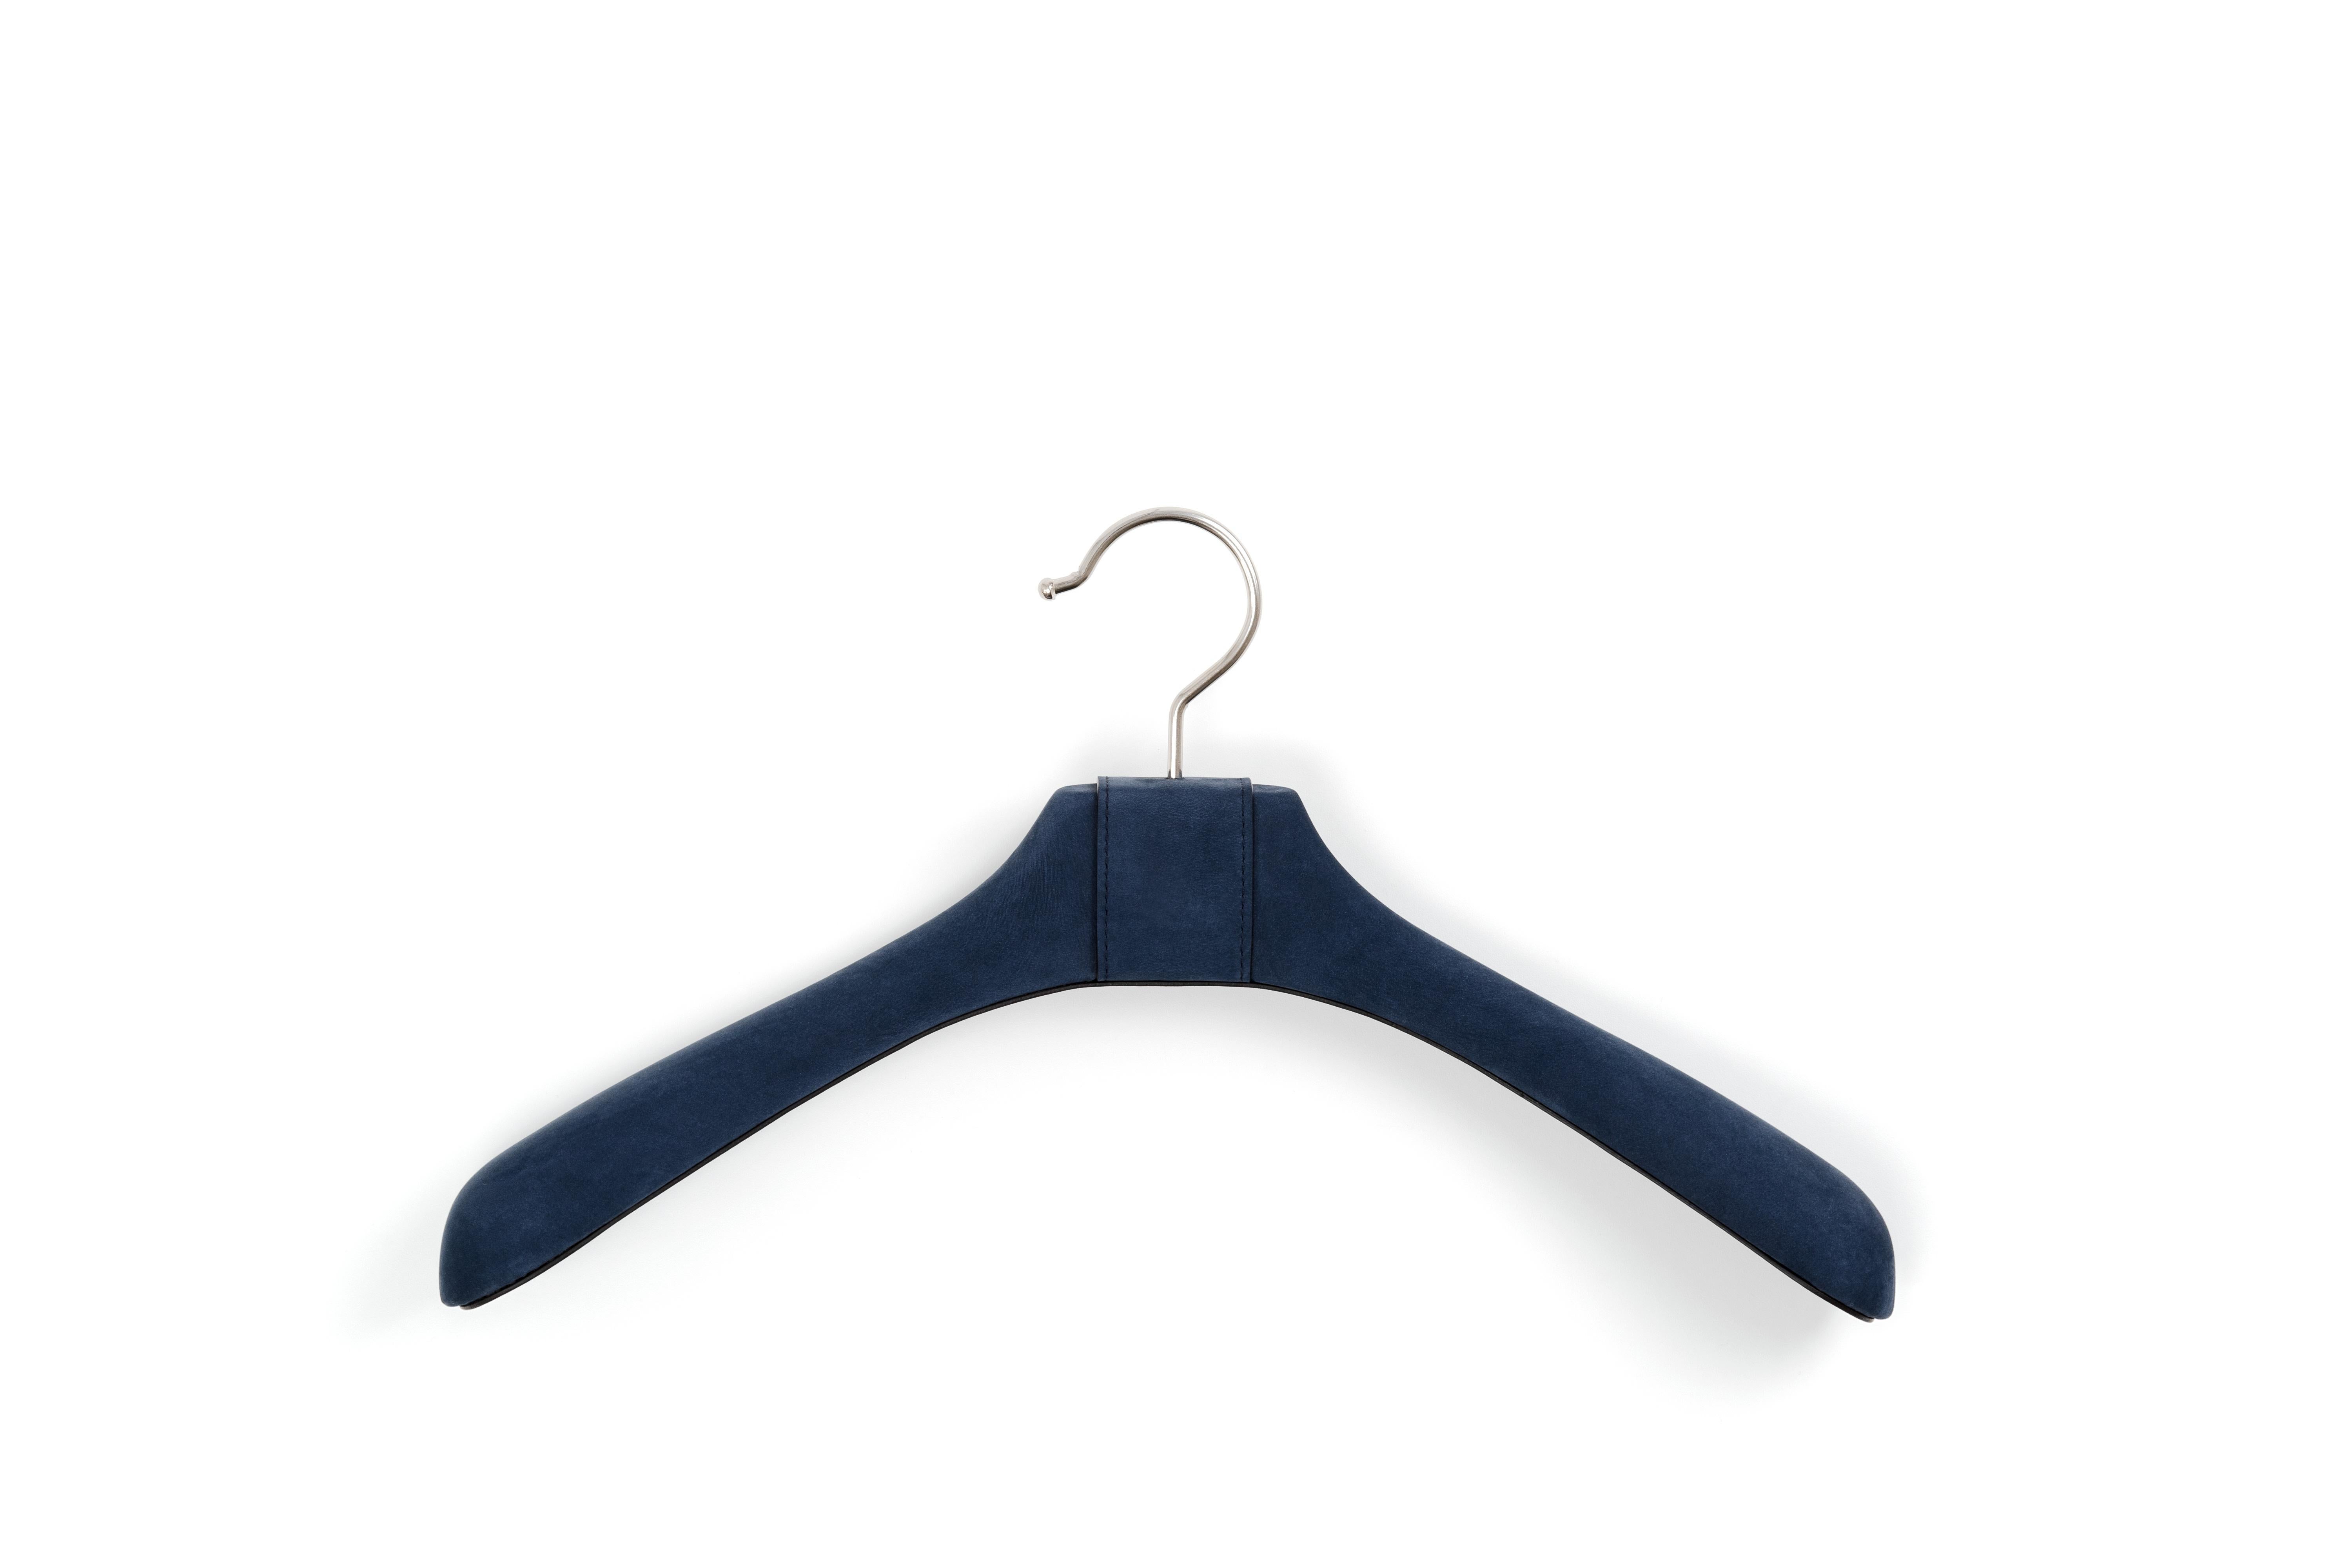 Hand-Crafted 21st Century Coat Hanger Full Covered in Real Leather Handcrafted in Italy For Sale